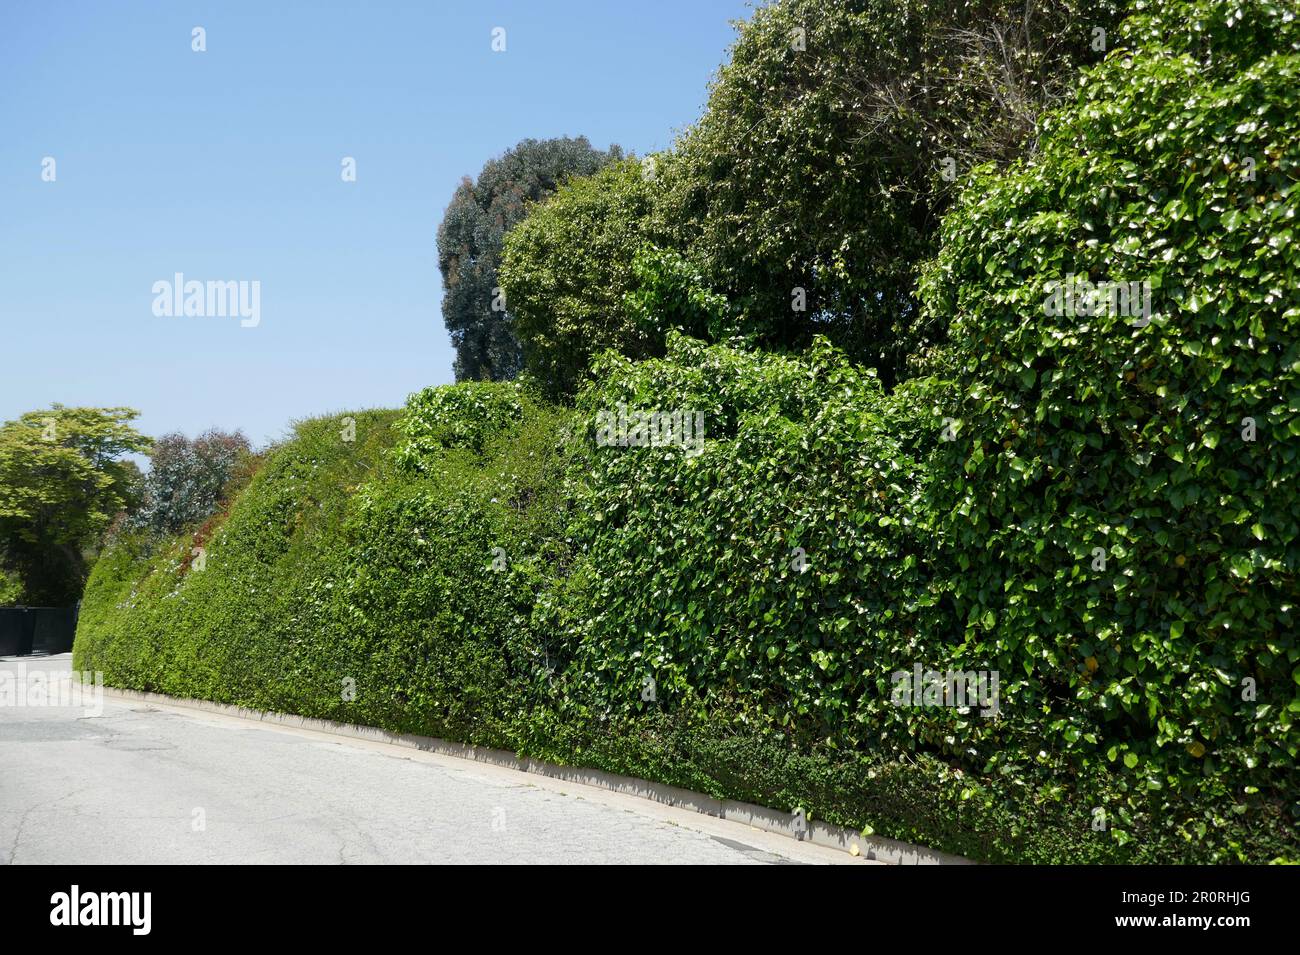 Los Angeles, California, USA 8th May 2023 Singers LaVerne Andrews Patty Andrews and Maxene Andrews of the Andrews Sisters Former Home/house on N. Saltair Avenue on May 8, 2023 in Los Angeles, California, USA. Photo by Barry King/Alamy Stock Photo Stock Photo